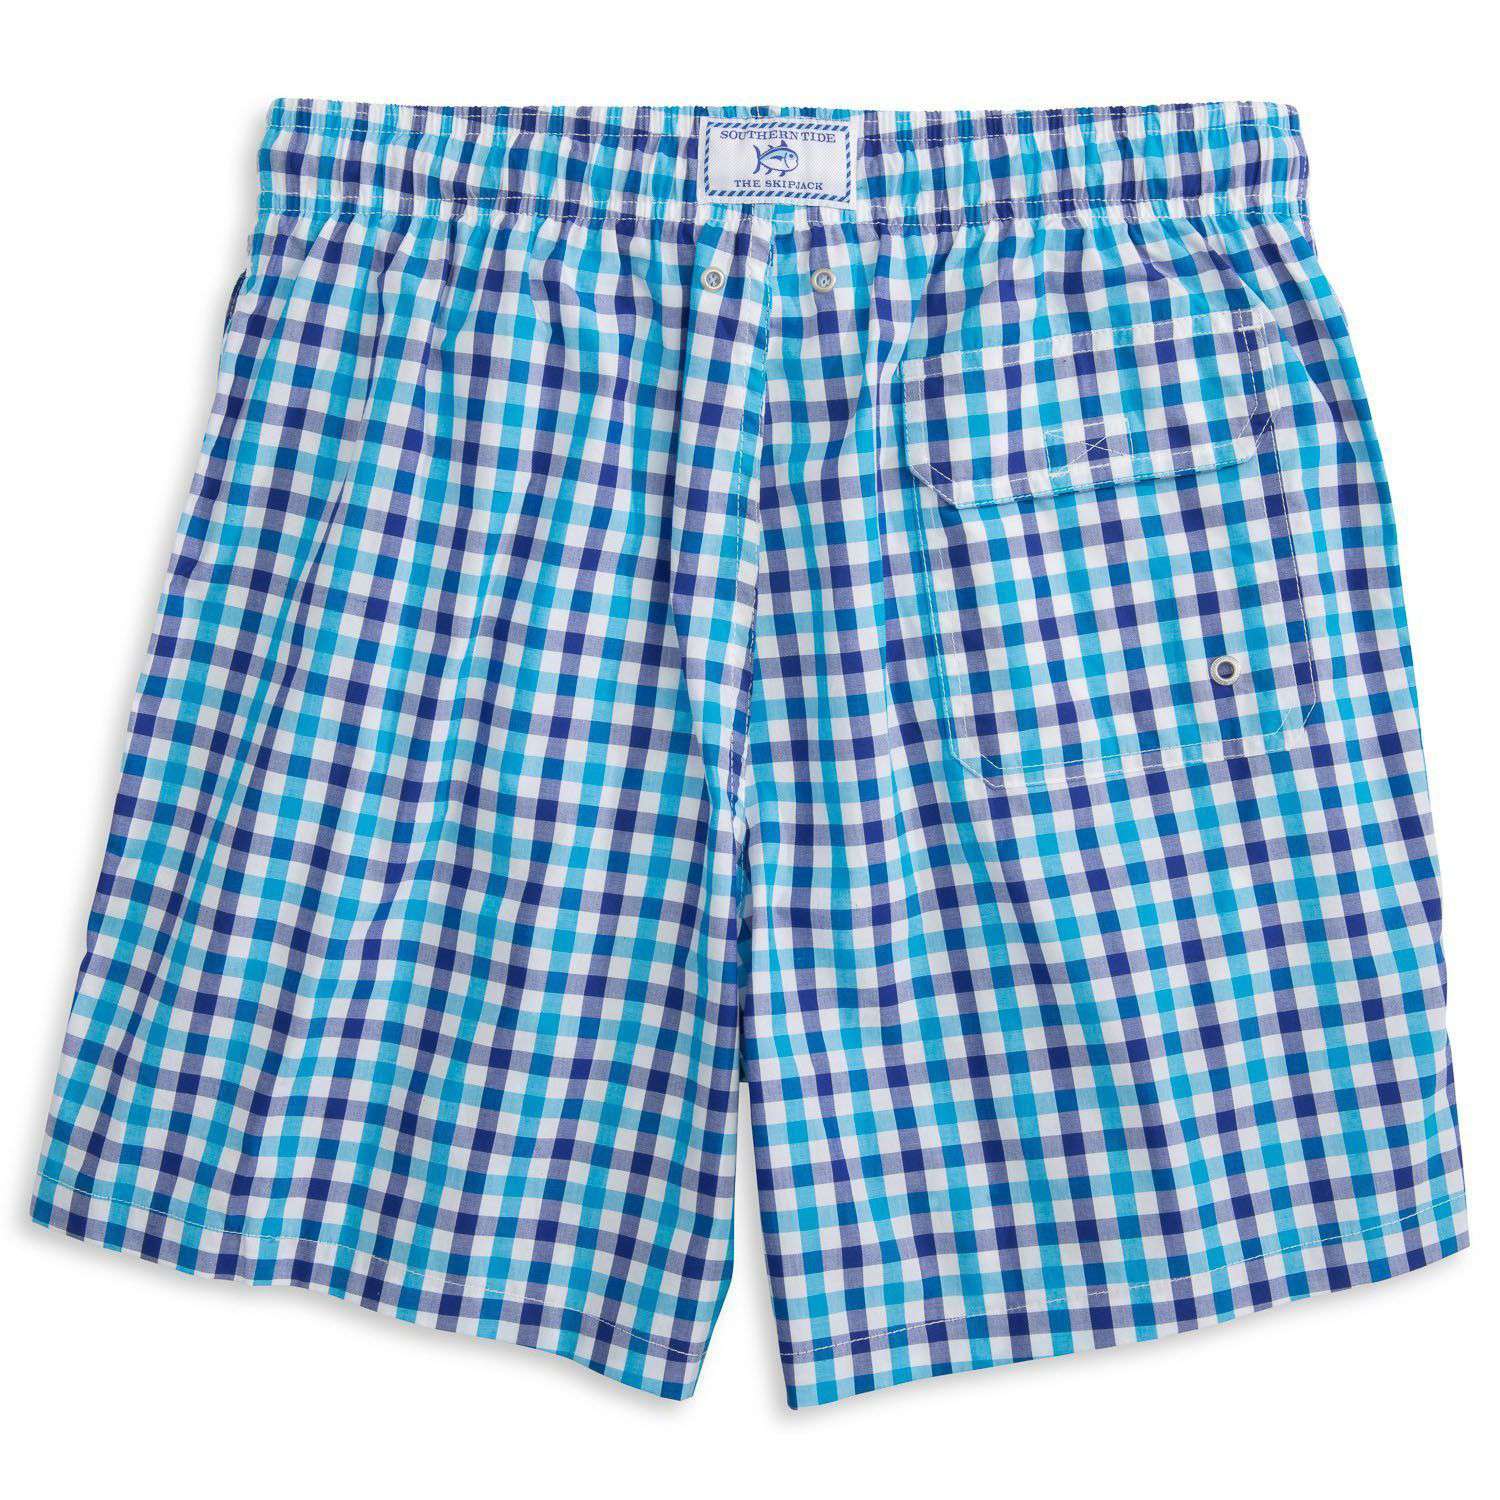 Gingham Swim Trunks in Scuba Blue by Southern Tide - Country Club Prep